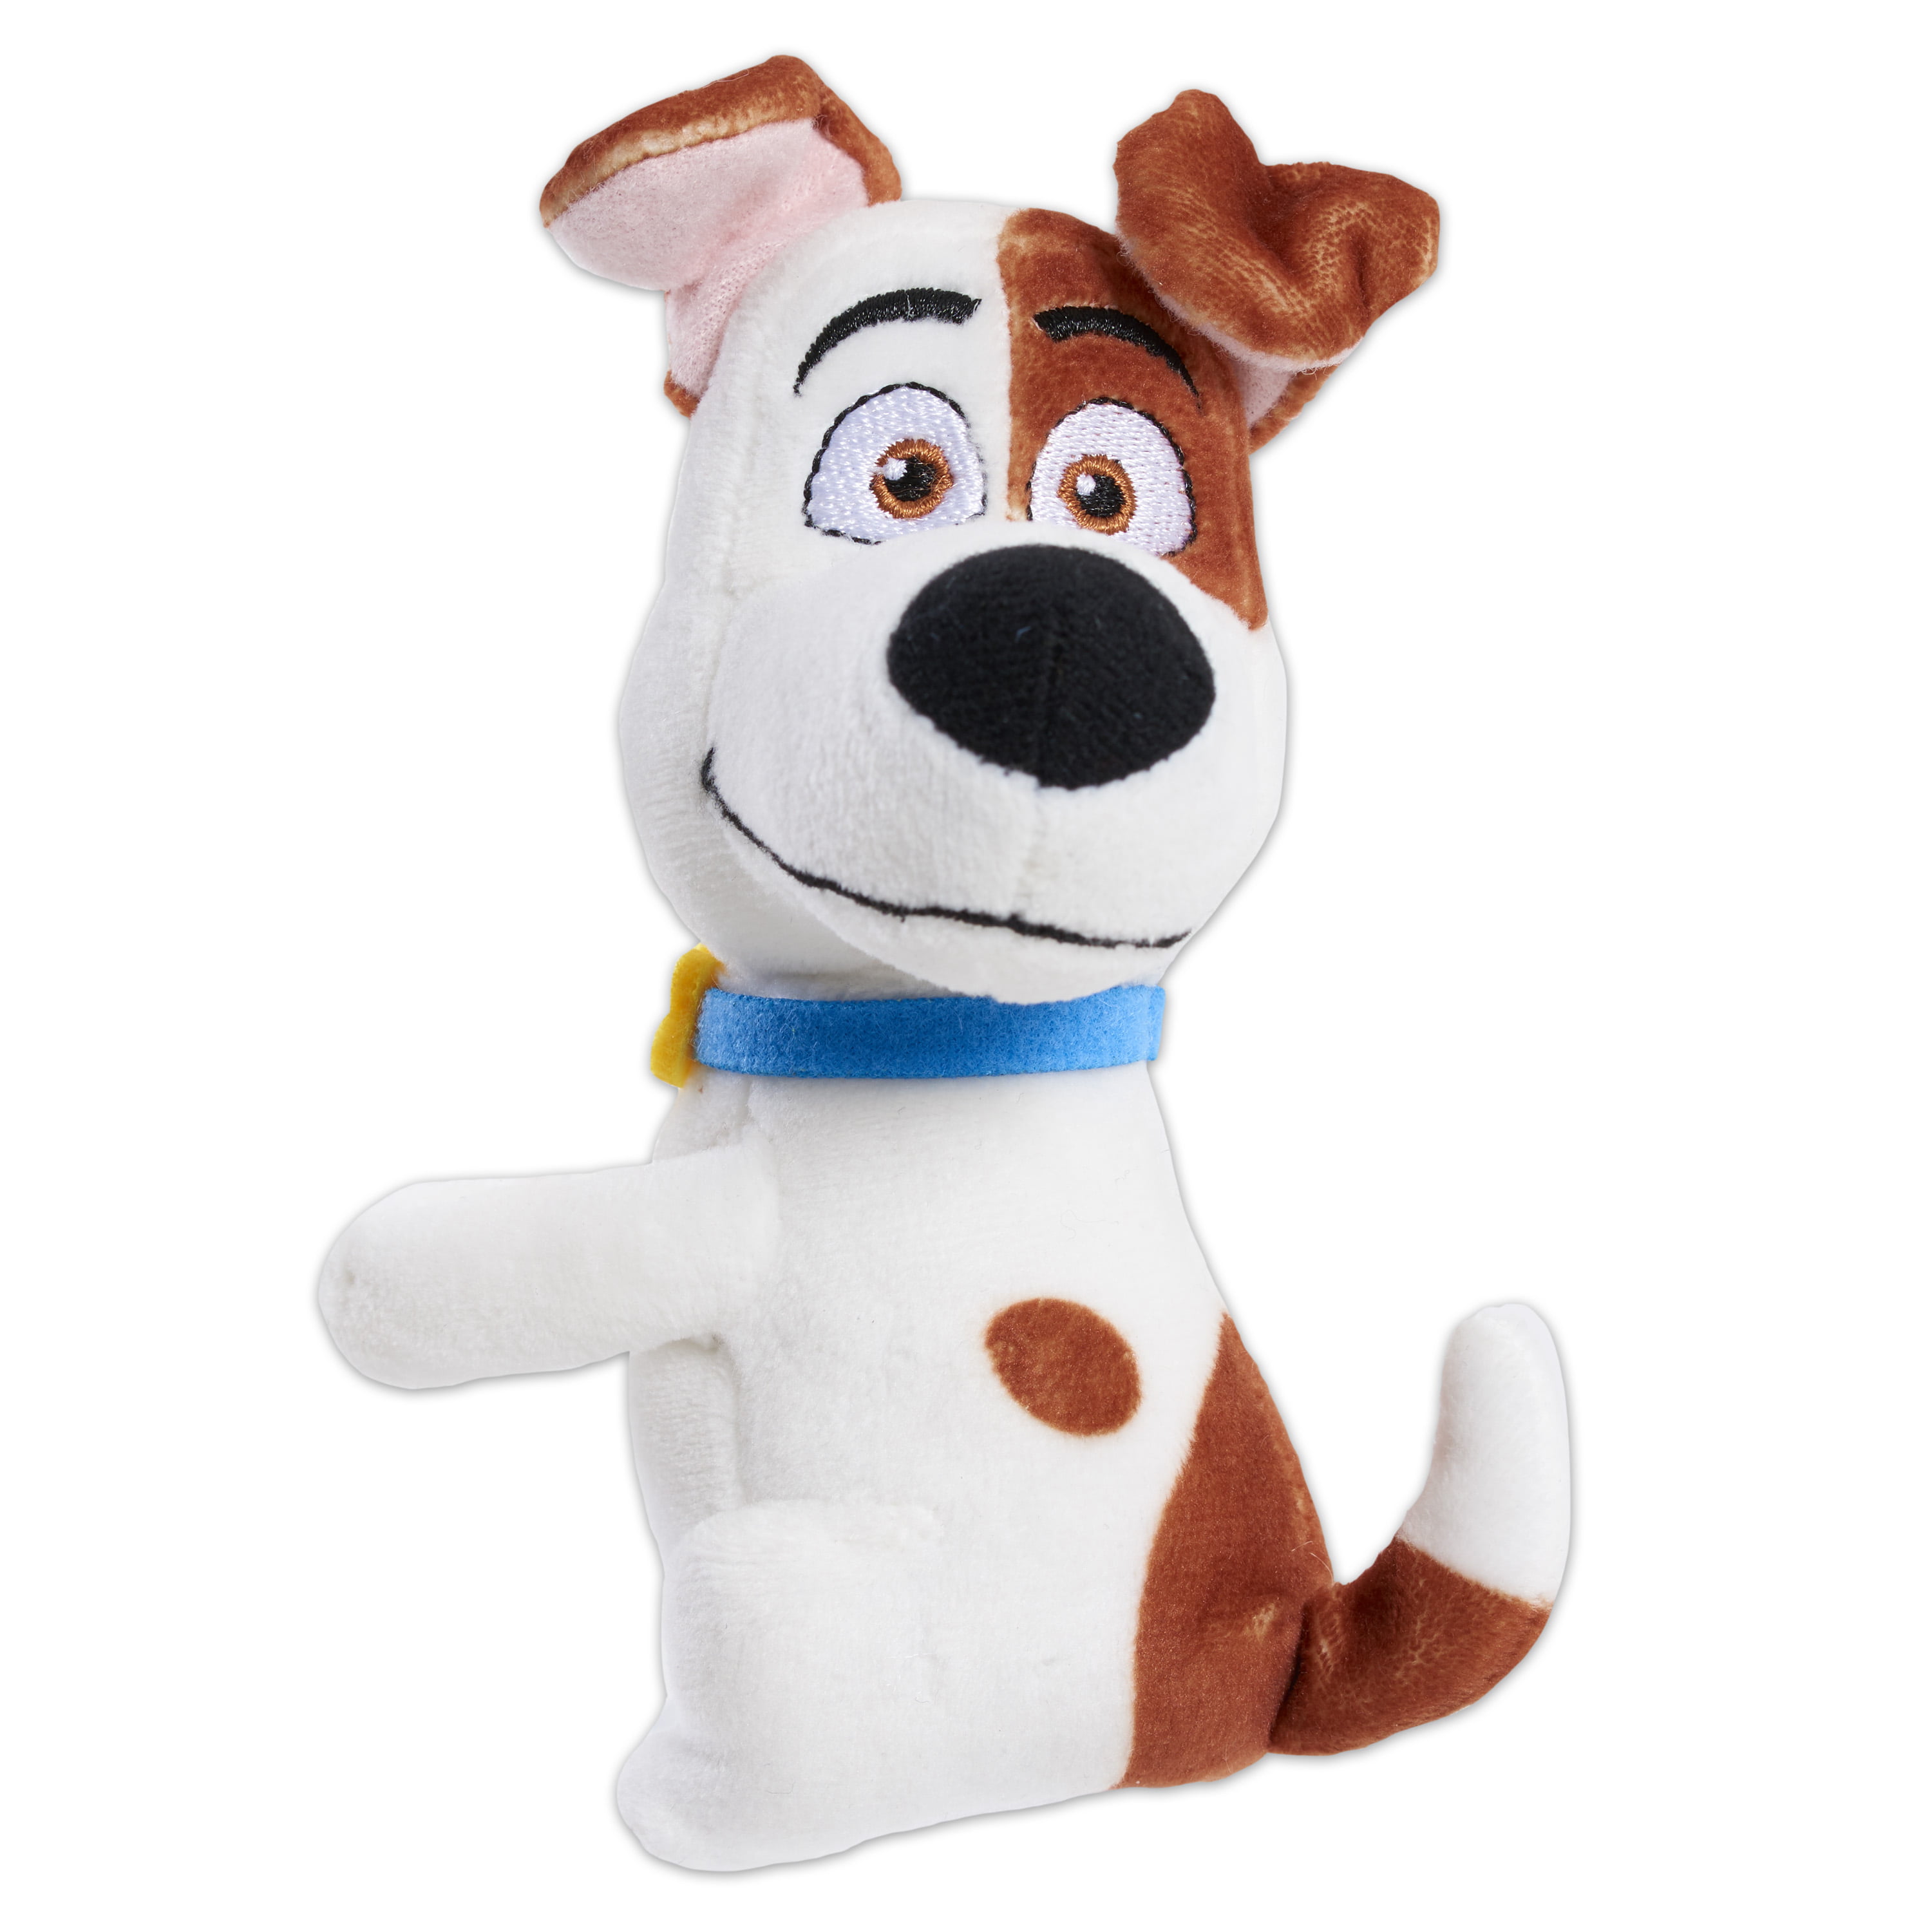 Ty Beanie Babies Max Dog The Secret Life of Pets Plush Stuffed Animal 7in for sale online 